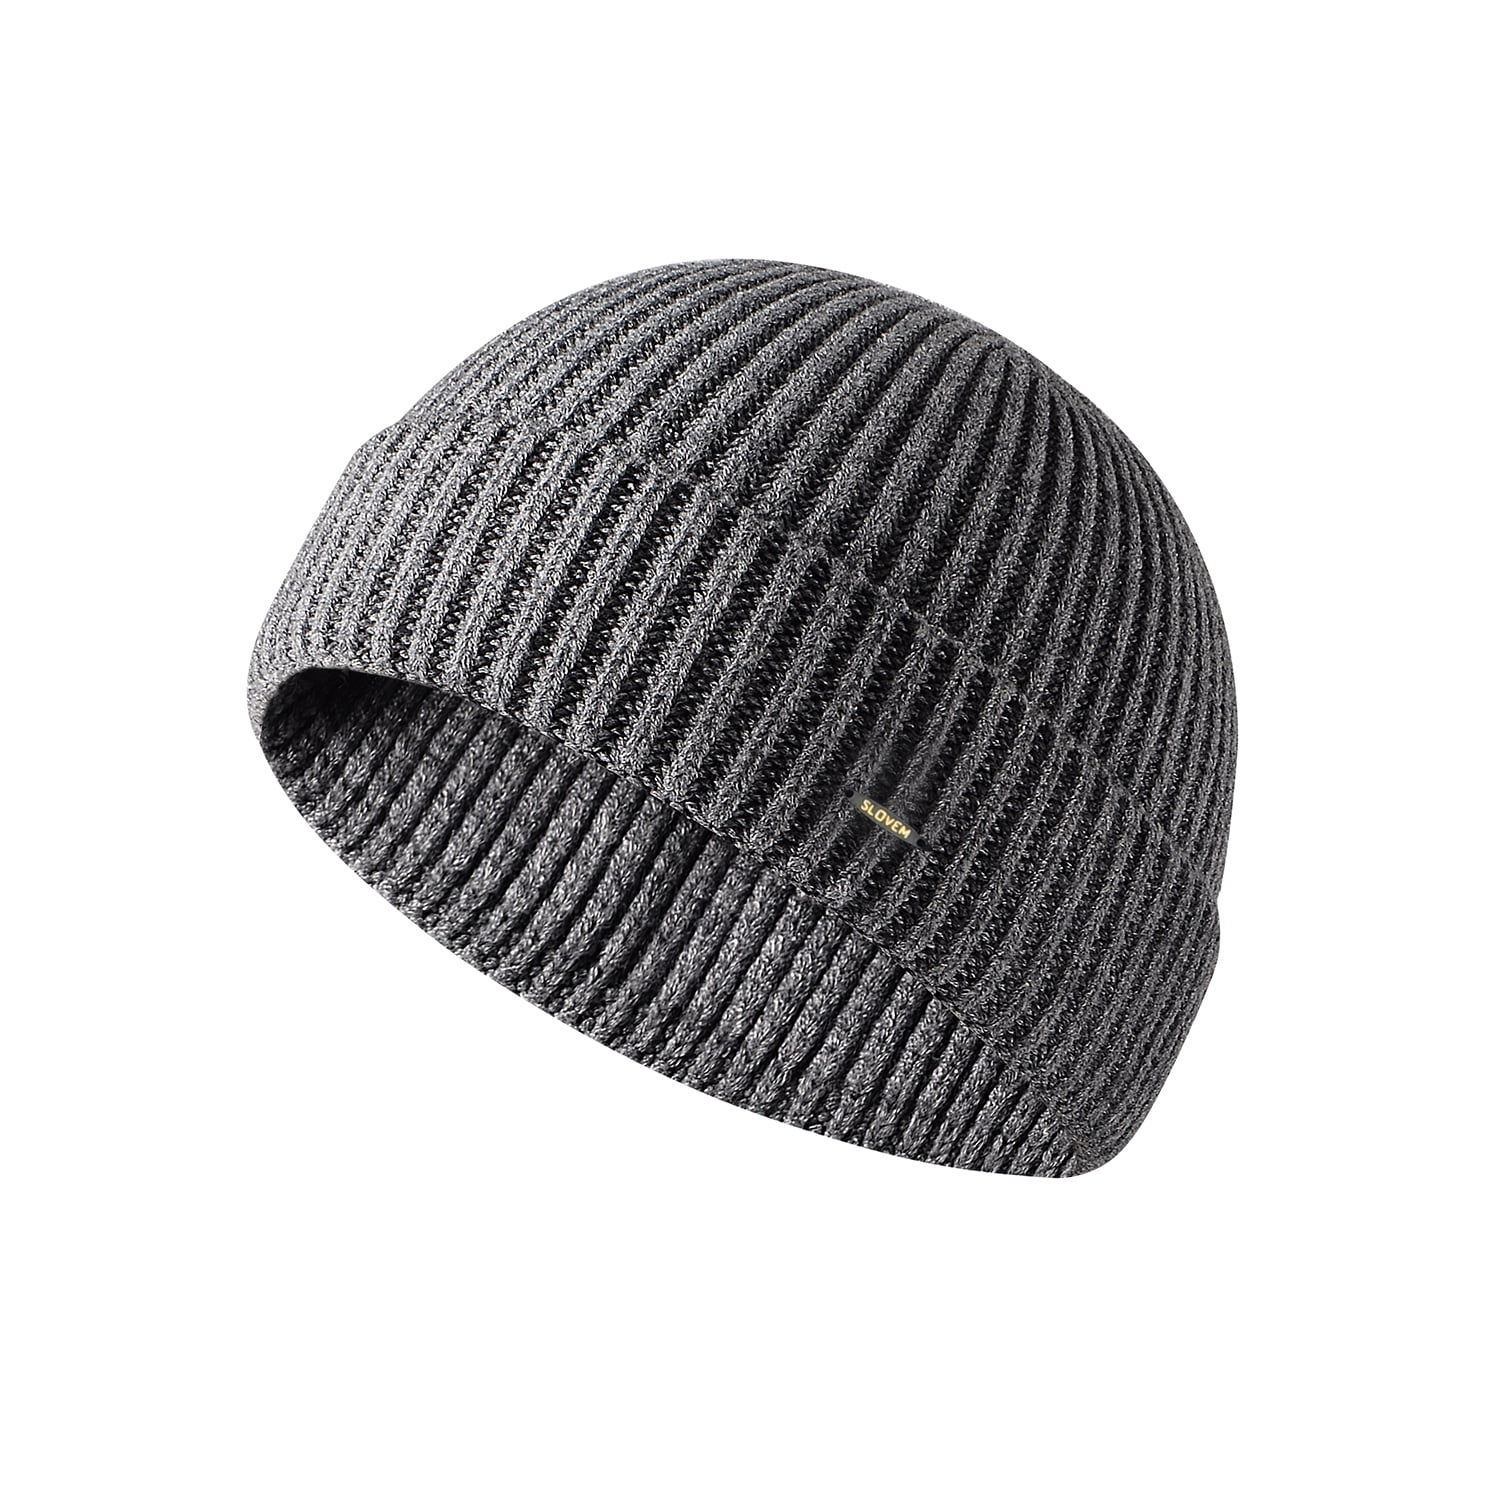 JASMODER Black and White Polka Dot Adult Knit Hats Casual Unisex Beanie Hat Printing Skull Cap Black for Men and Women 